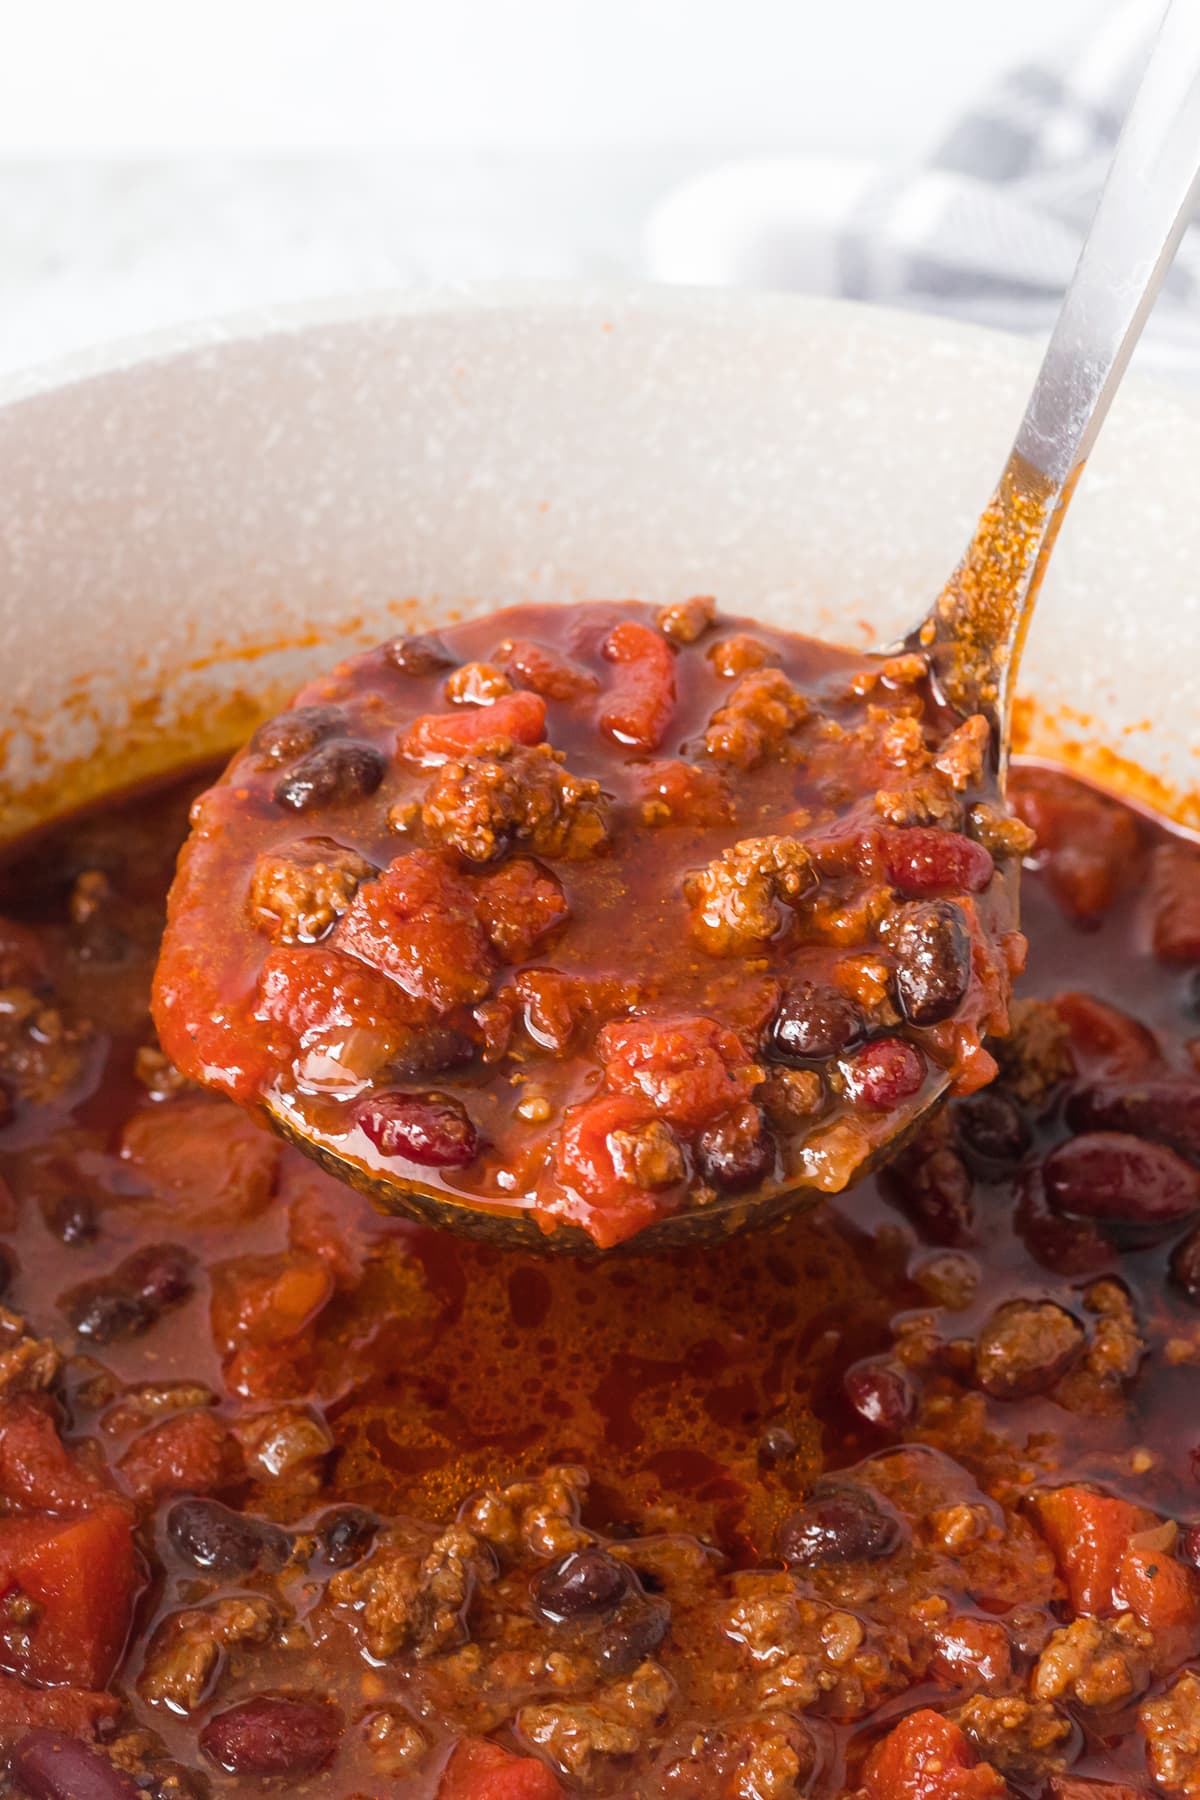 Chili being scooped out of a pot.